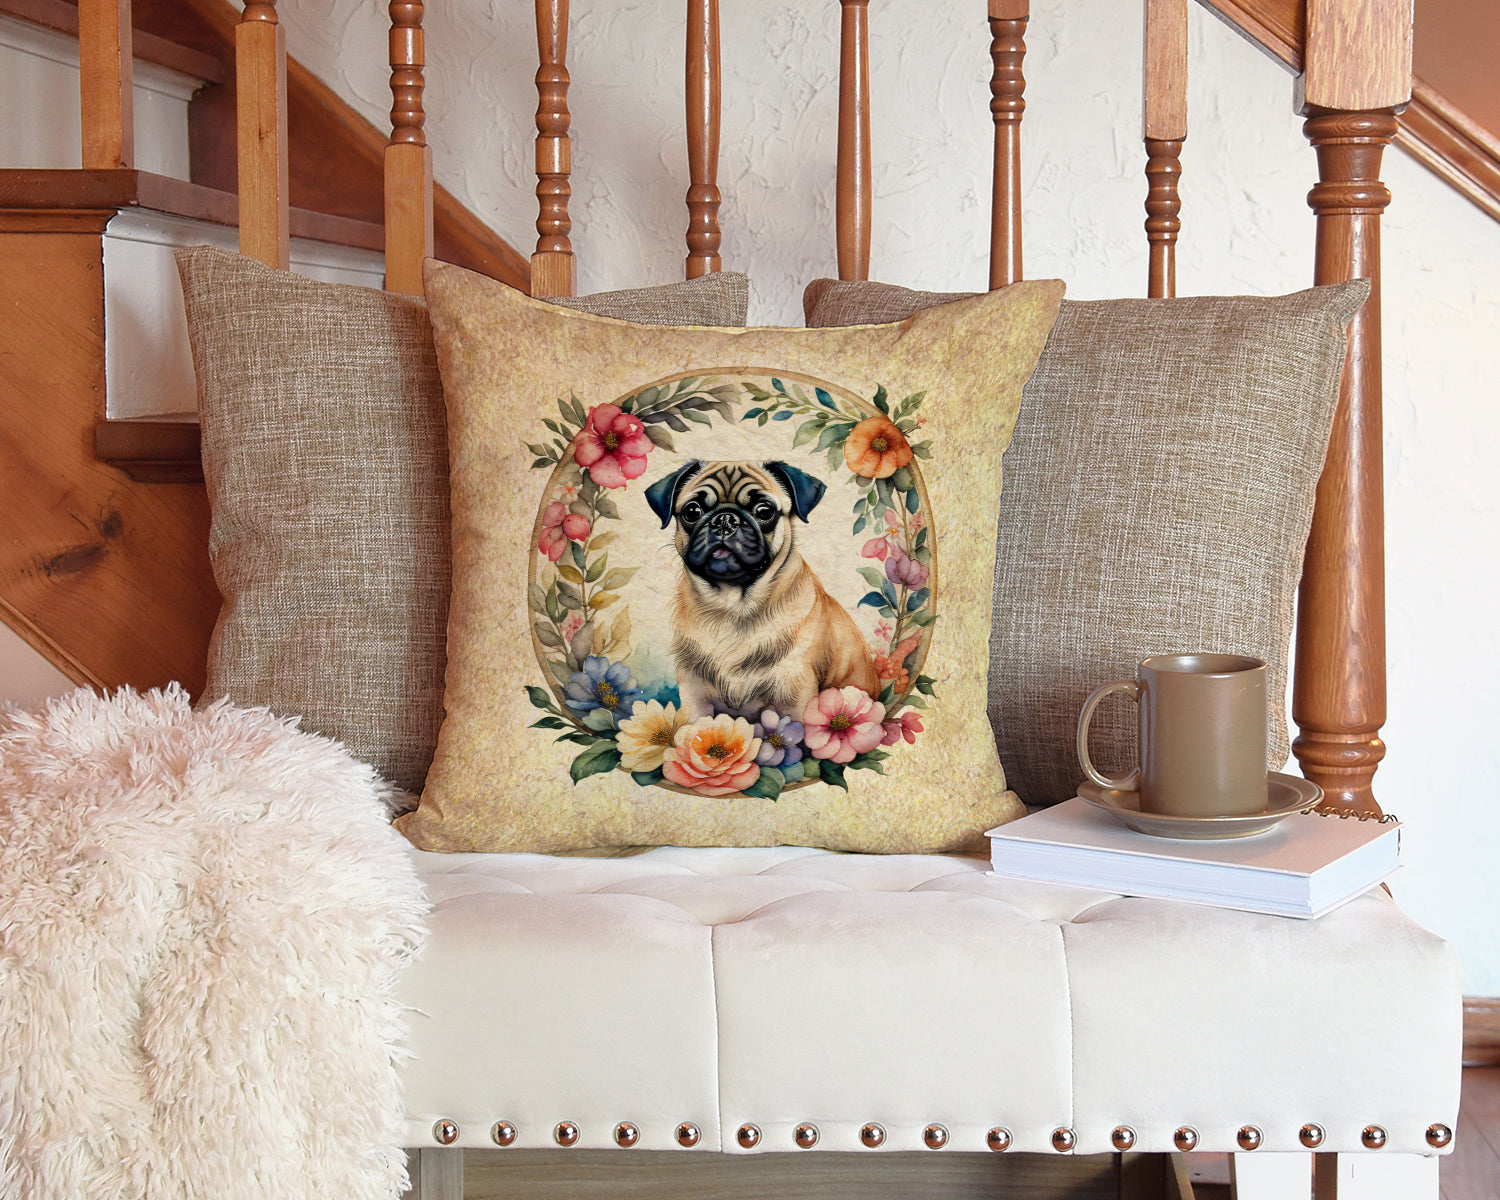 Fawn Pug and Flowers Fabric Decorative Pillow